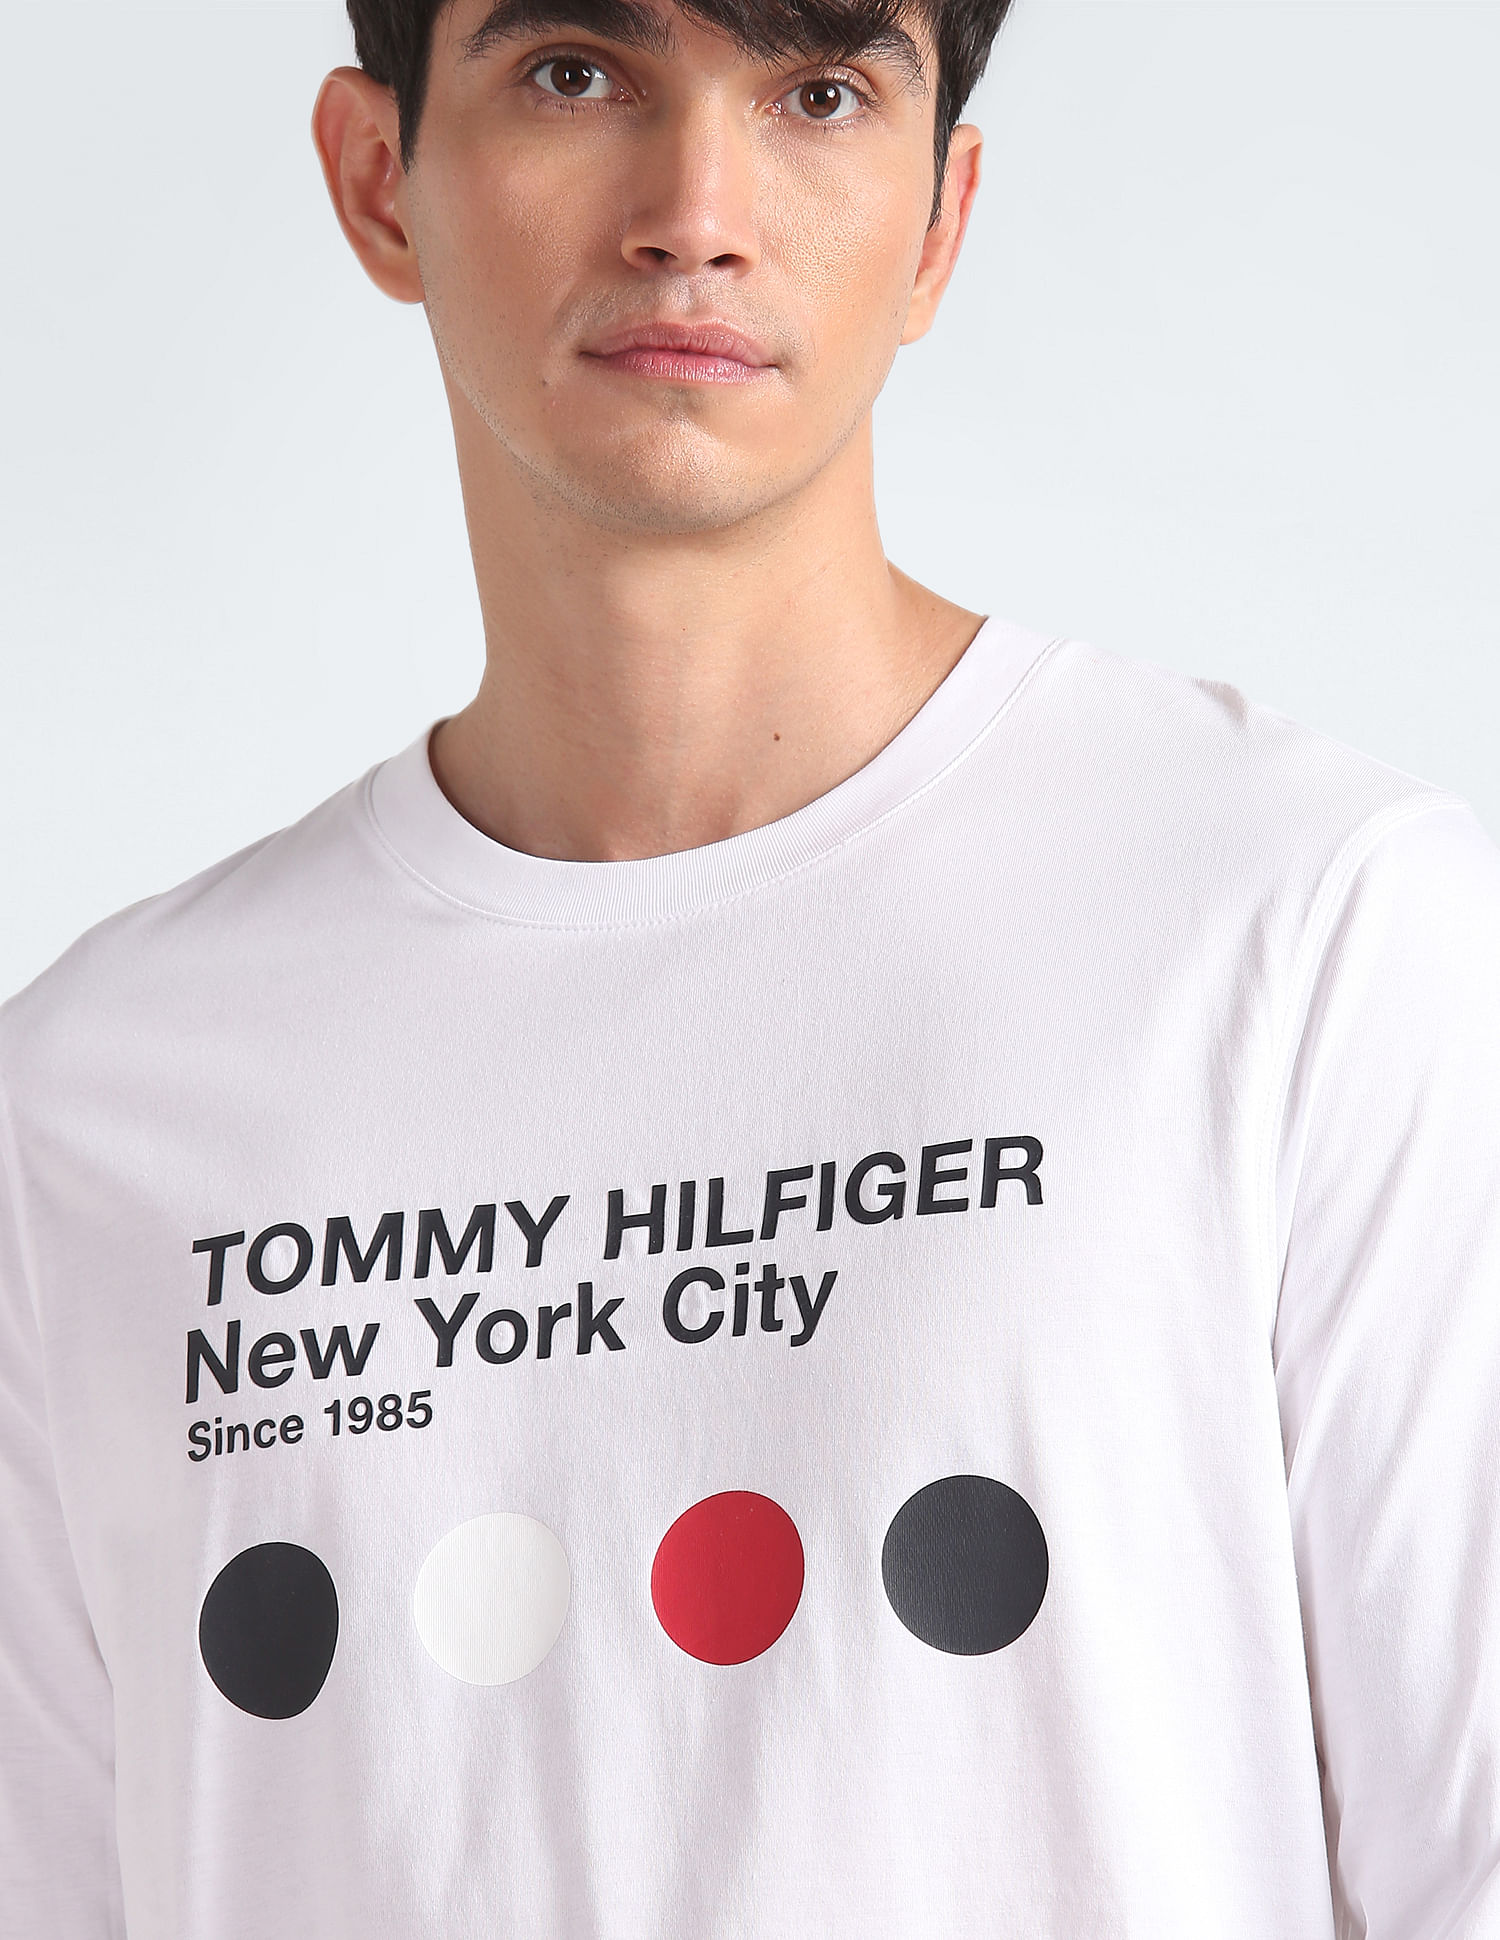 T-Shirt Long Buy Typographic Hilfiger Print Tommy Sleeve